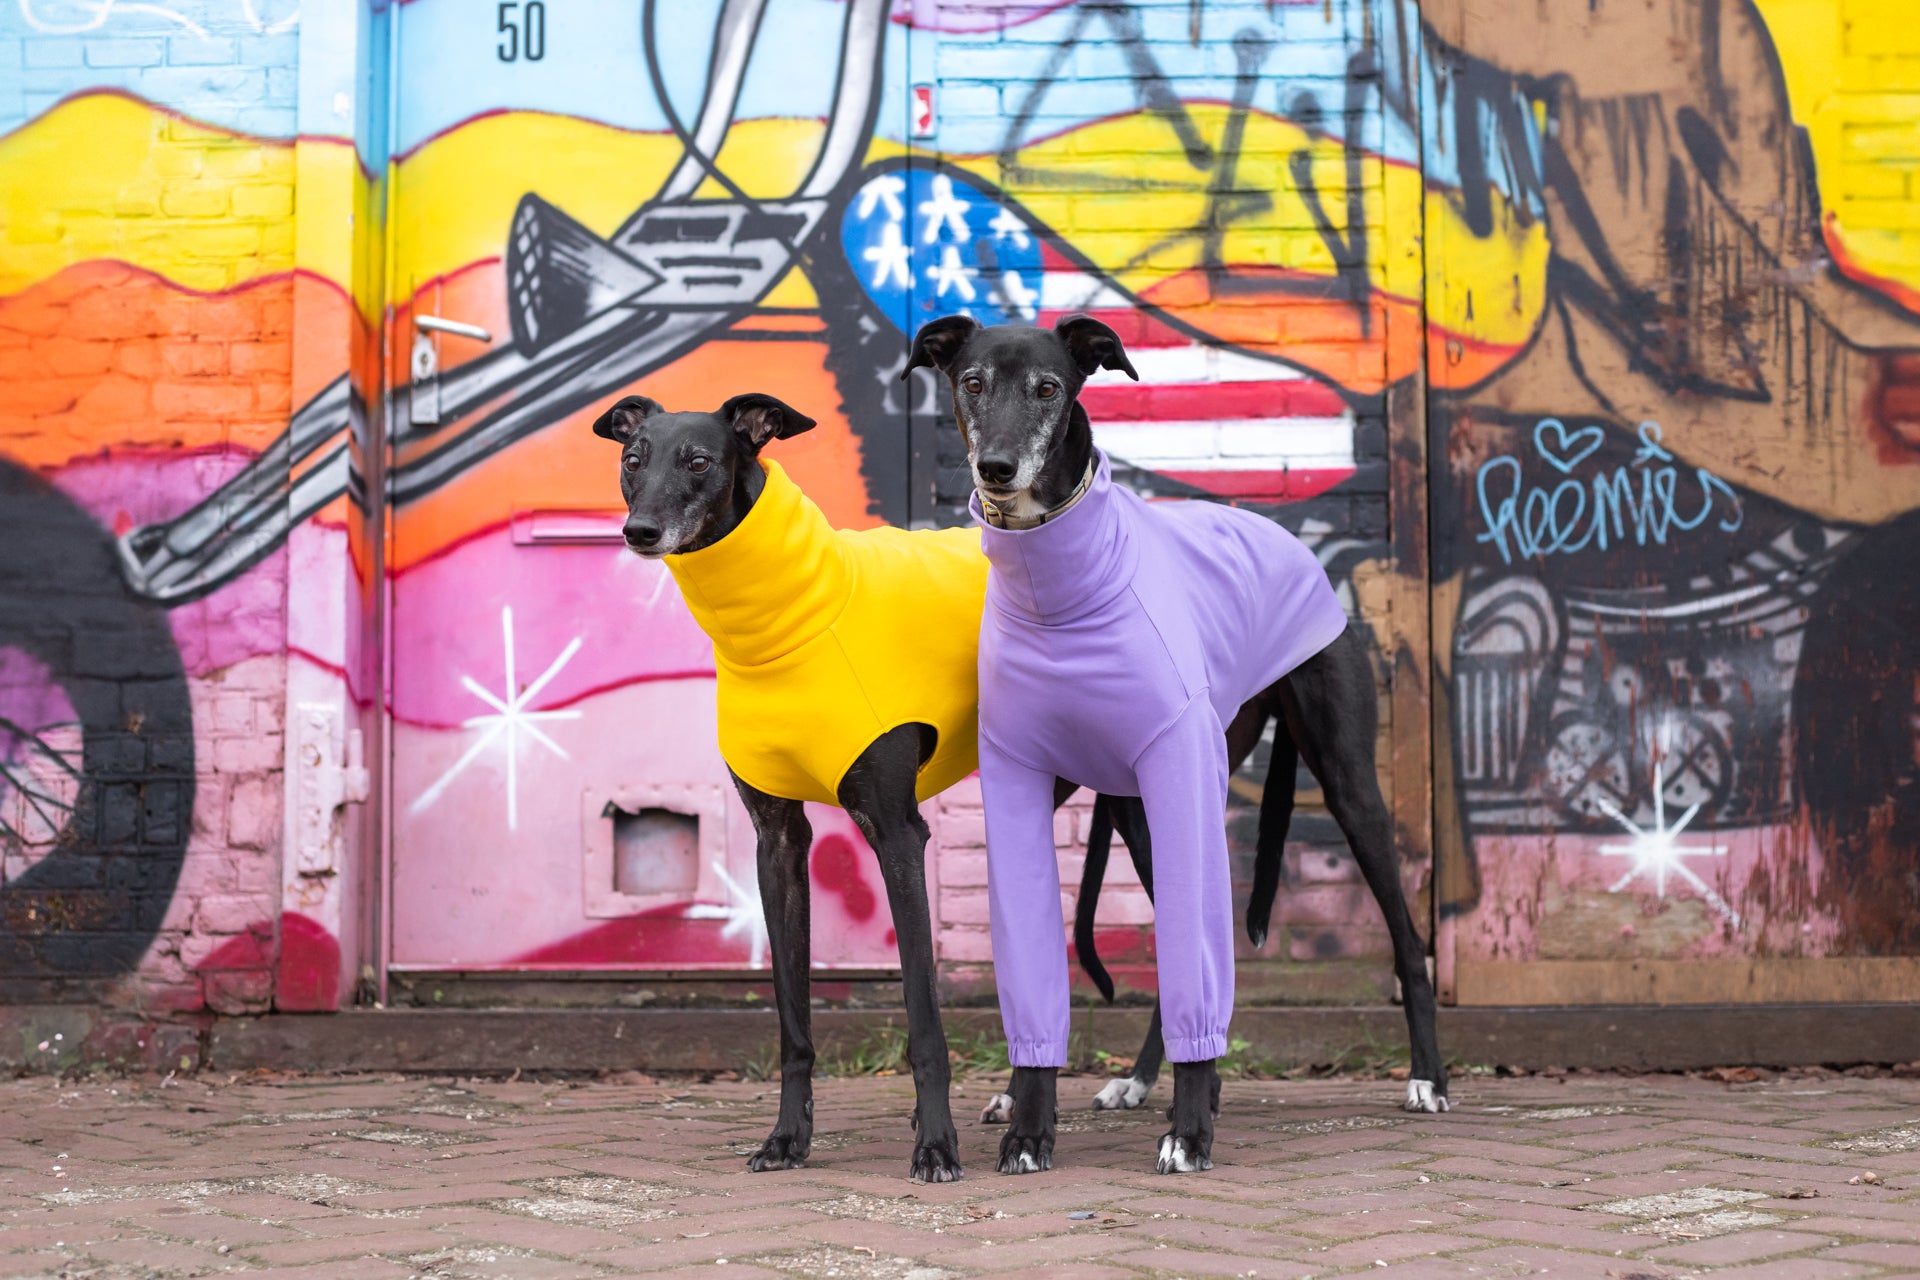 Two whippets in skinny dog clothing in front of a graffiti wall